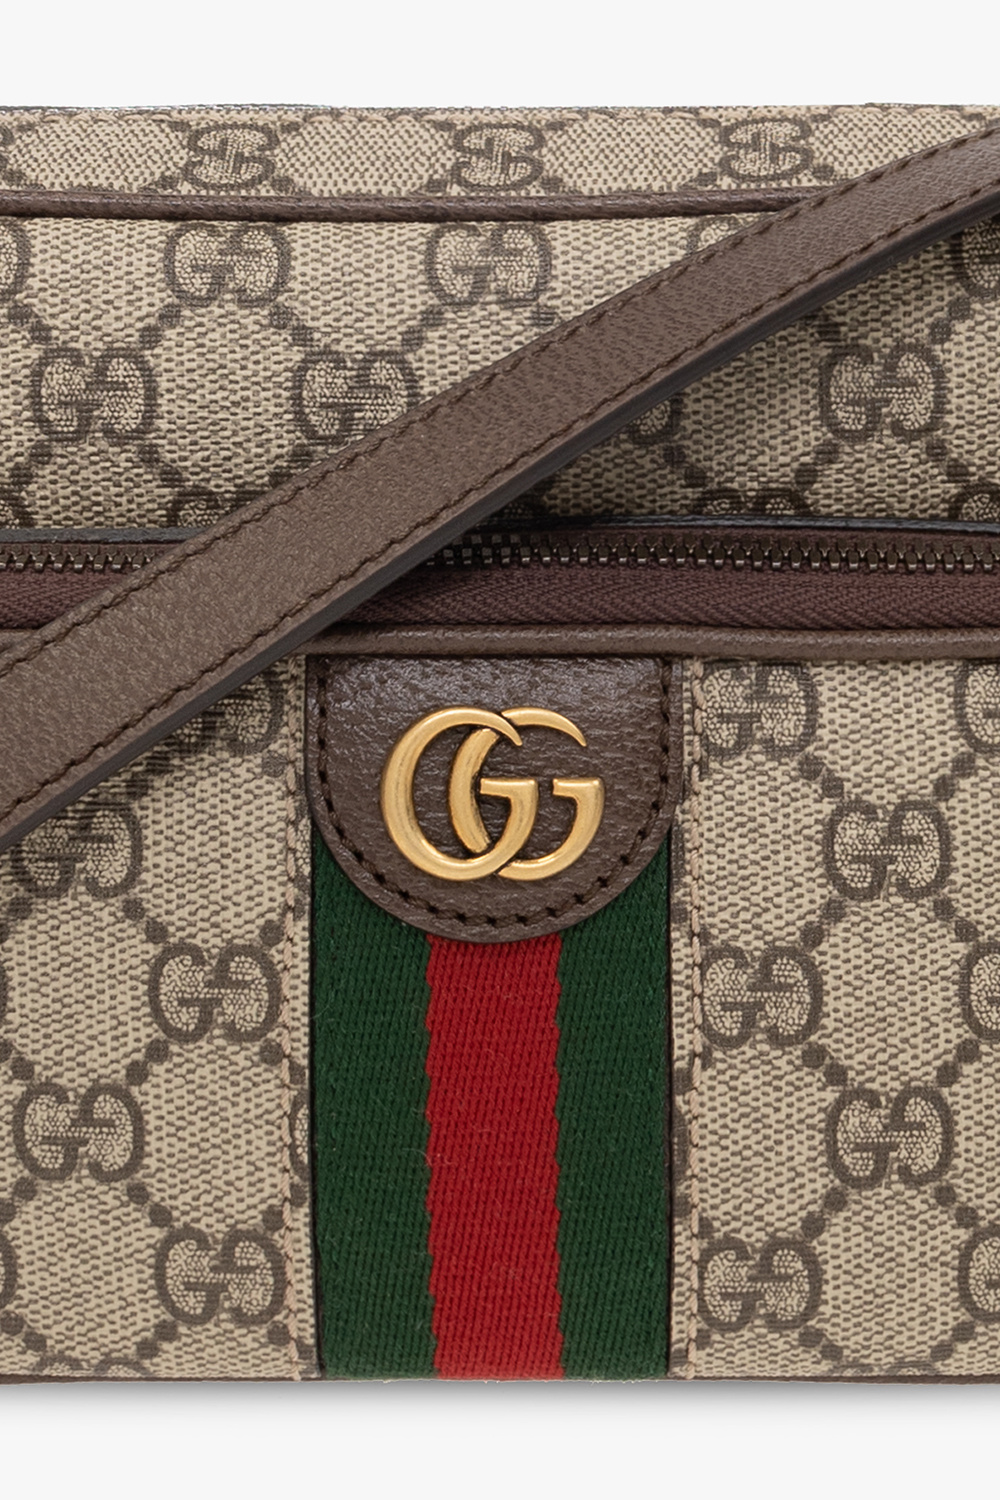 Gucci ‘Ophidia Small’ Leather bag